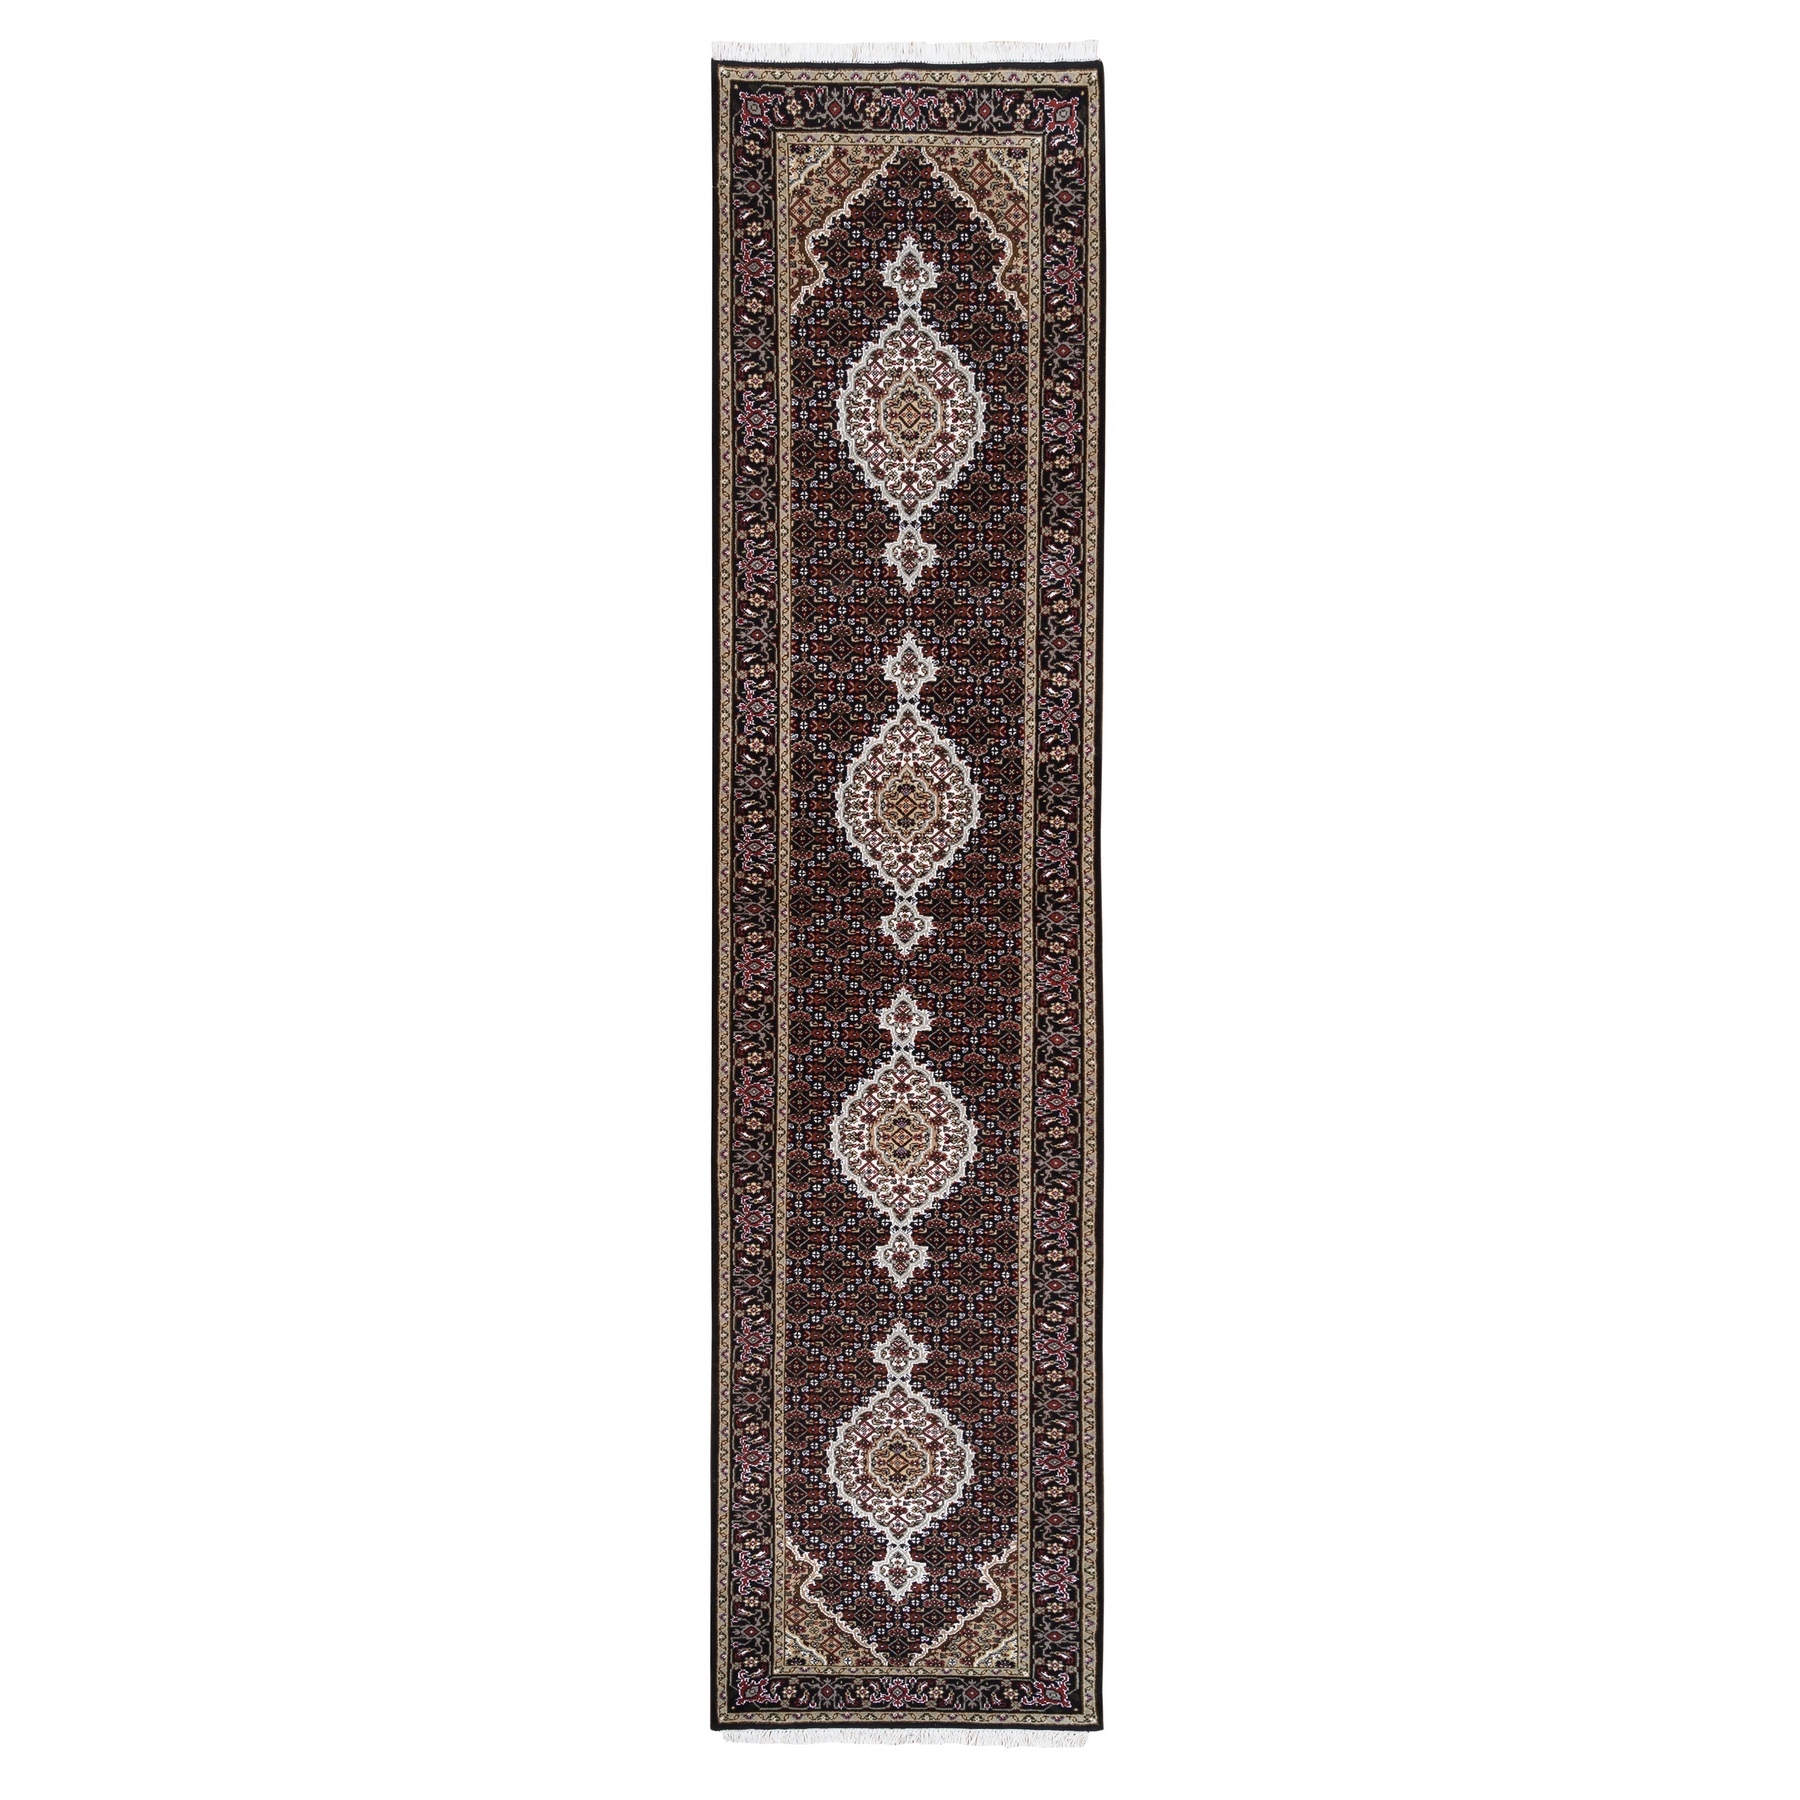 Pirniakan Collection Hand Knotted Black Rug No: 1125014